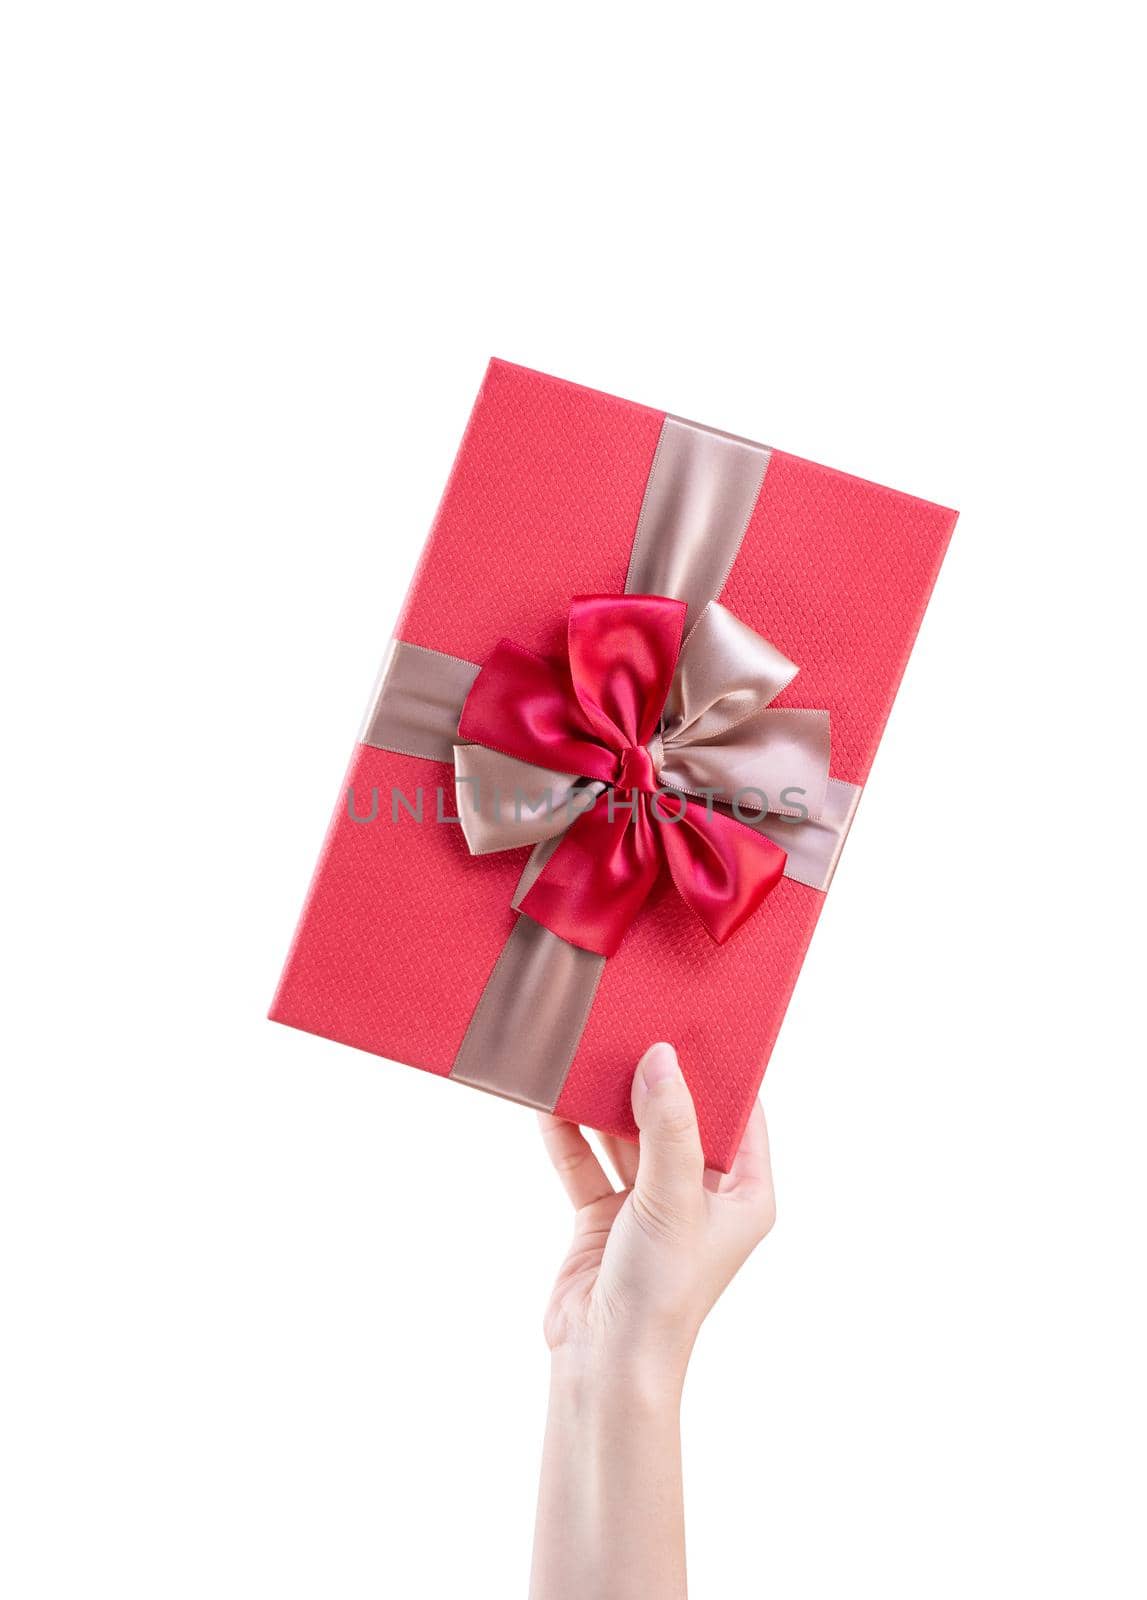 Asian woman holding, giving, sending a wrapped packaged gift box with tied bow-knot isolated on white background, clipping path, cut out, close up. by ROMIXIMAGE